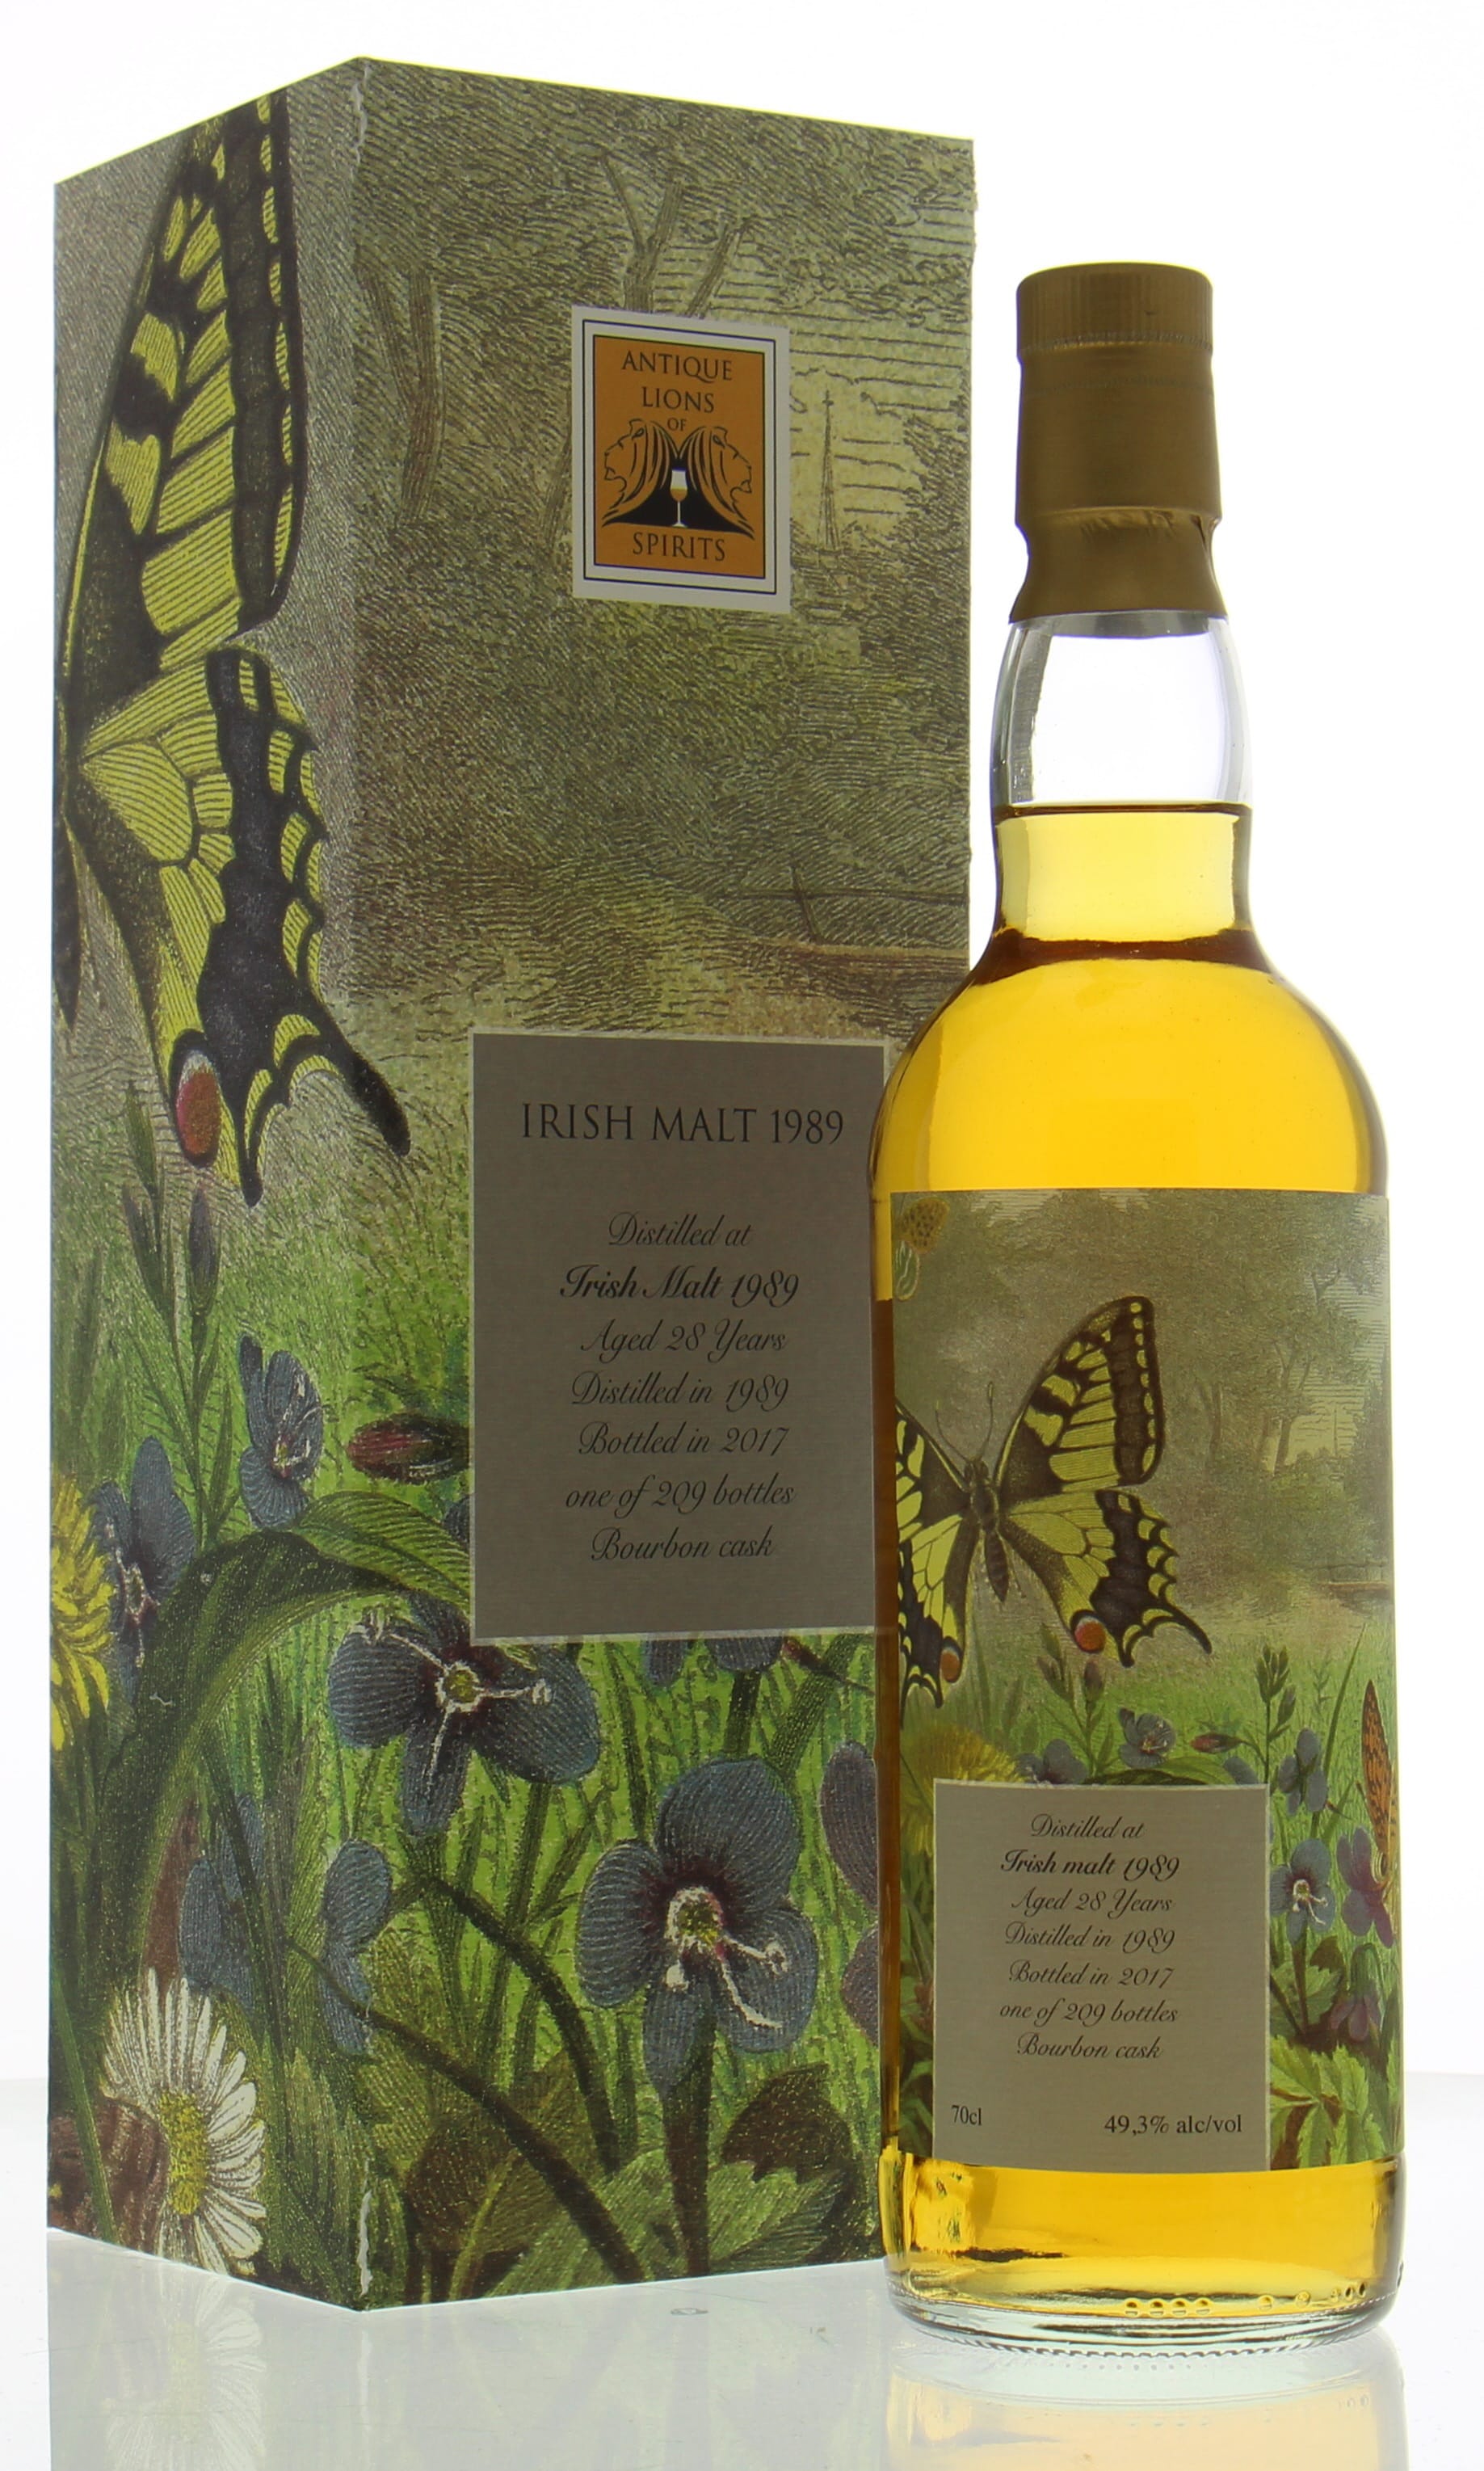 Irish Malt - 28 Years Old Antique Lions of Spirits The Butterflies 49.3% 1989 In Original Container